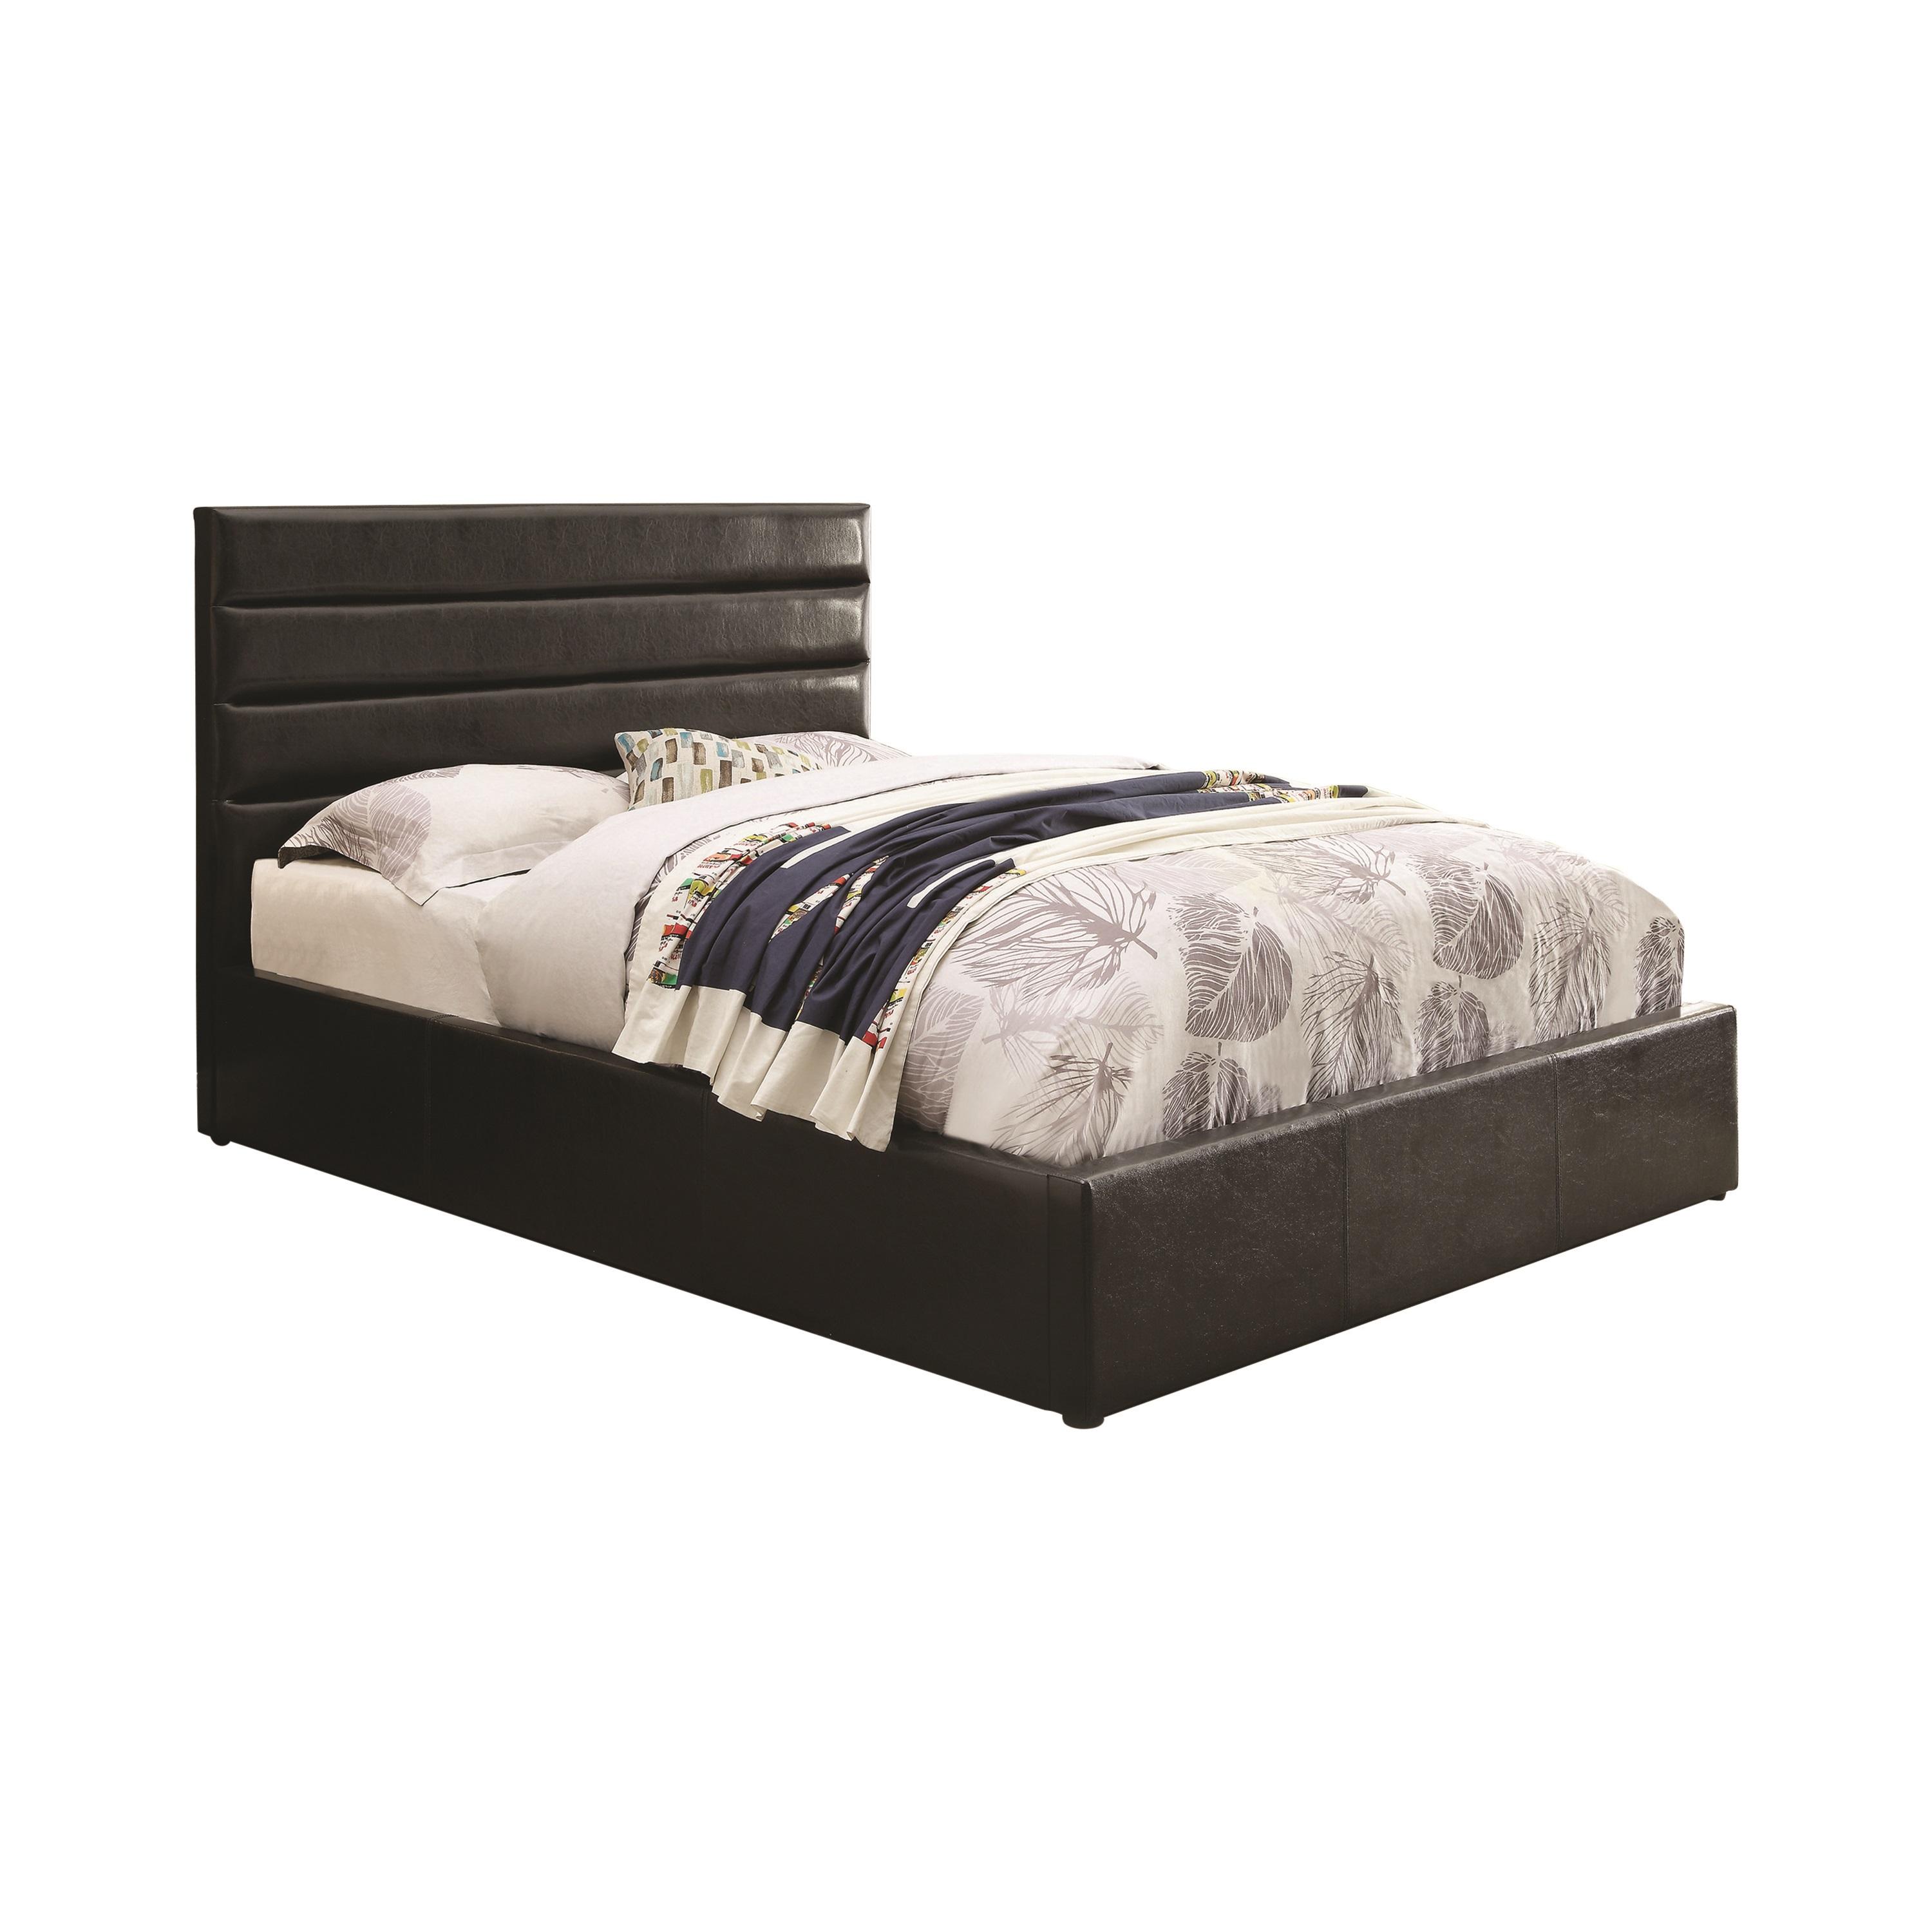 

    
Contemporary Black Leatherette Full Bed Coaster 300469F Riverbend
